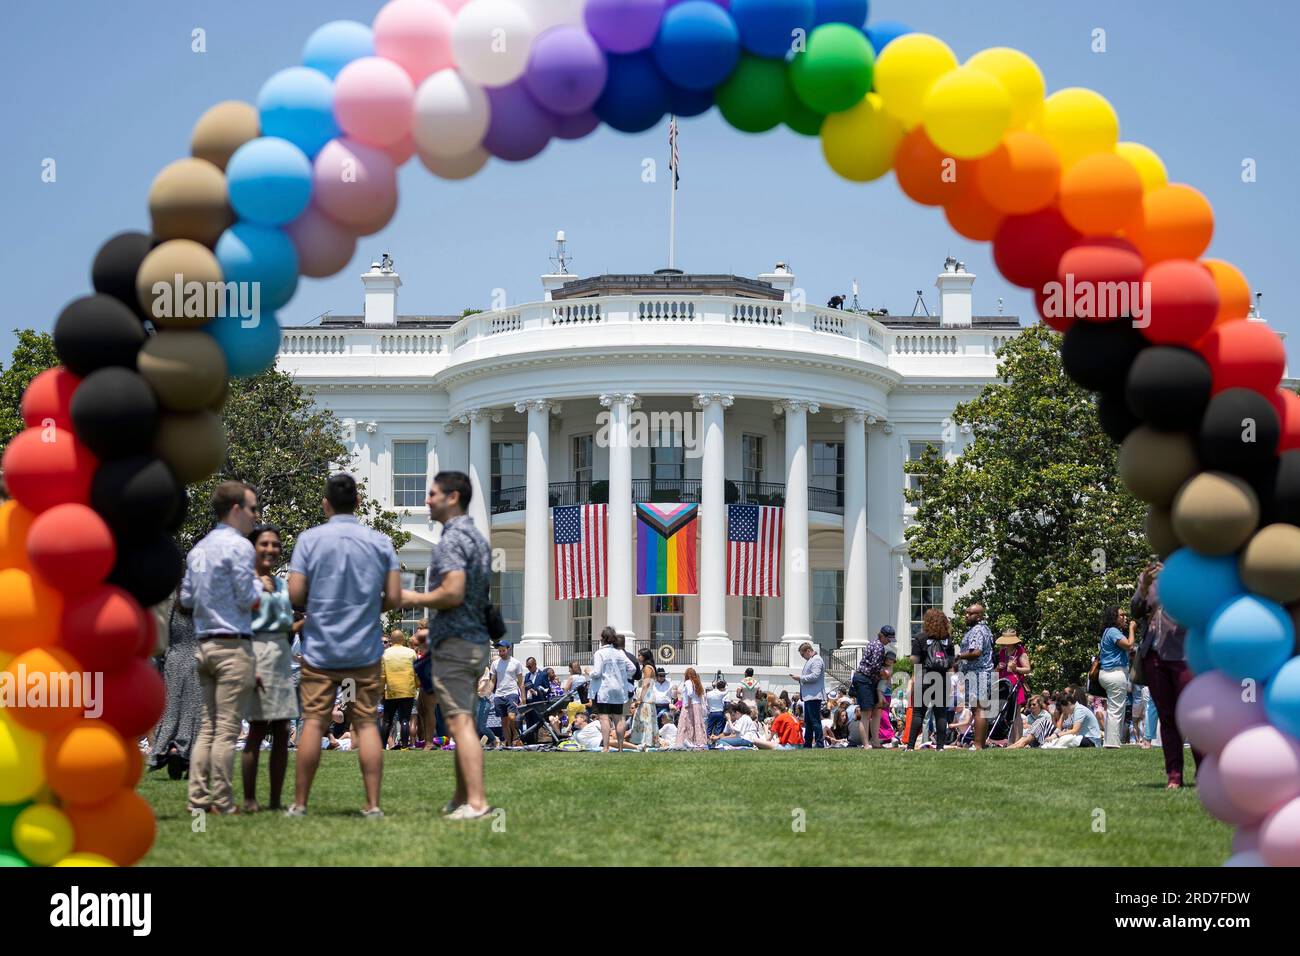 Washington, United States of America. 10 June, 2023. A rainbow balloon arch frames the south face of the White House during the annual Pride celebration on the South Lawn of the White House, June 10, 2023 in Washington, D.C. Credit: Carlos Fyfe/White House Photo/Alamy Live News Stock Photo